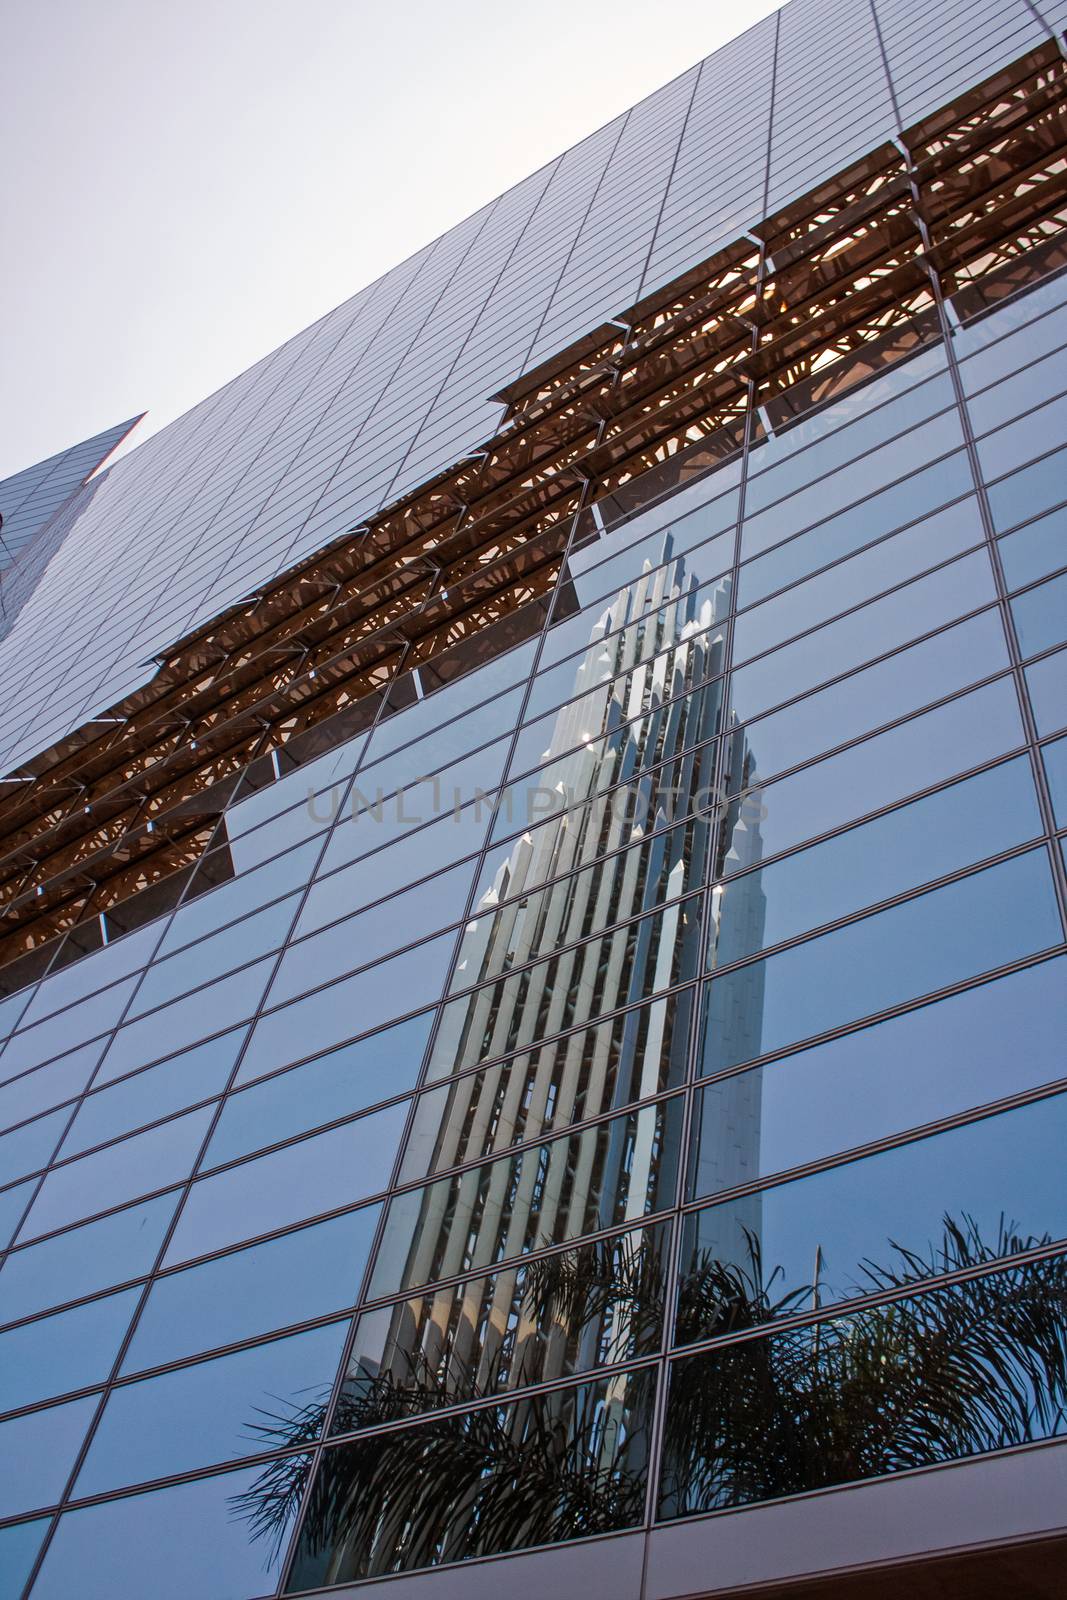 Crystal Cathedral by Roka